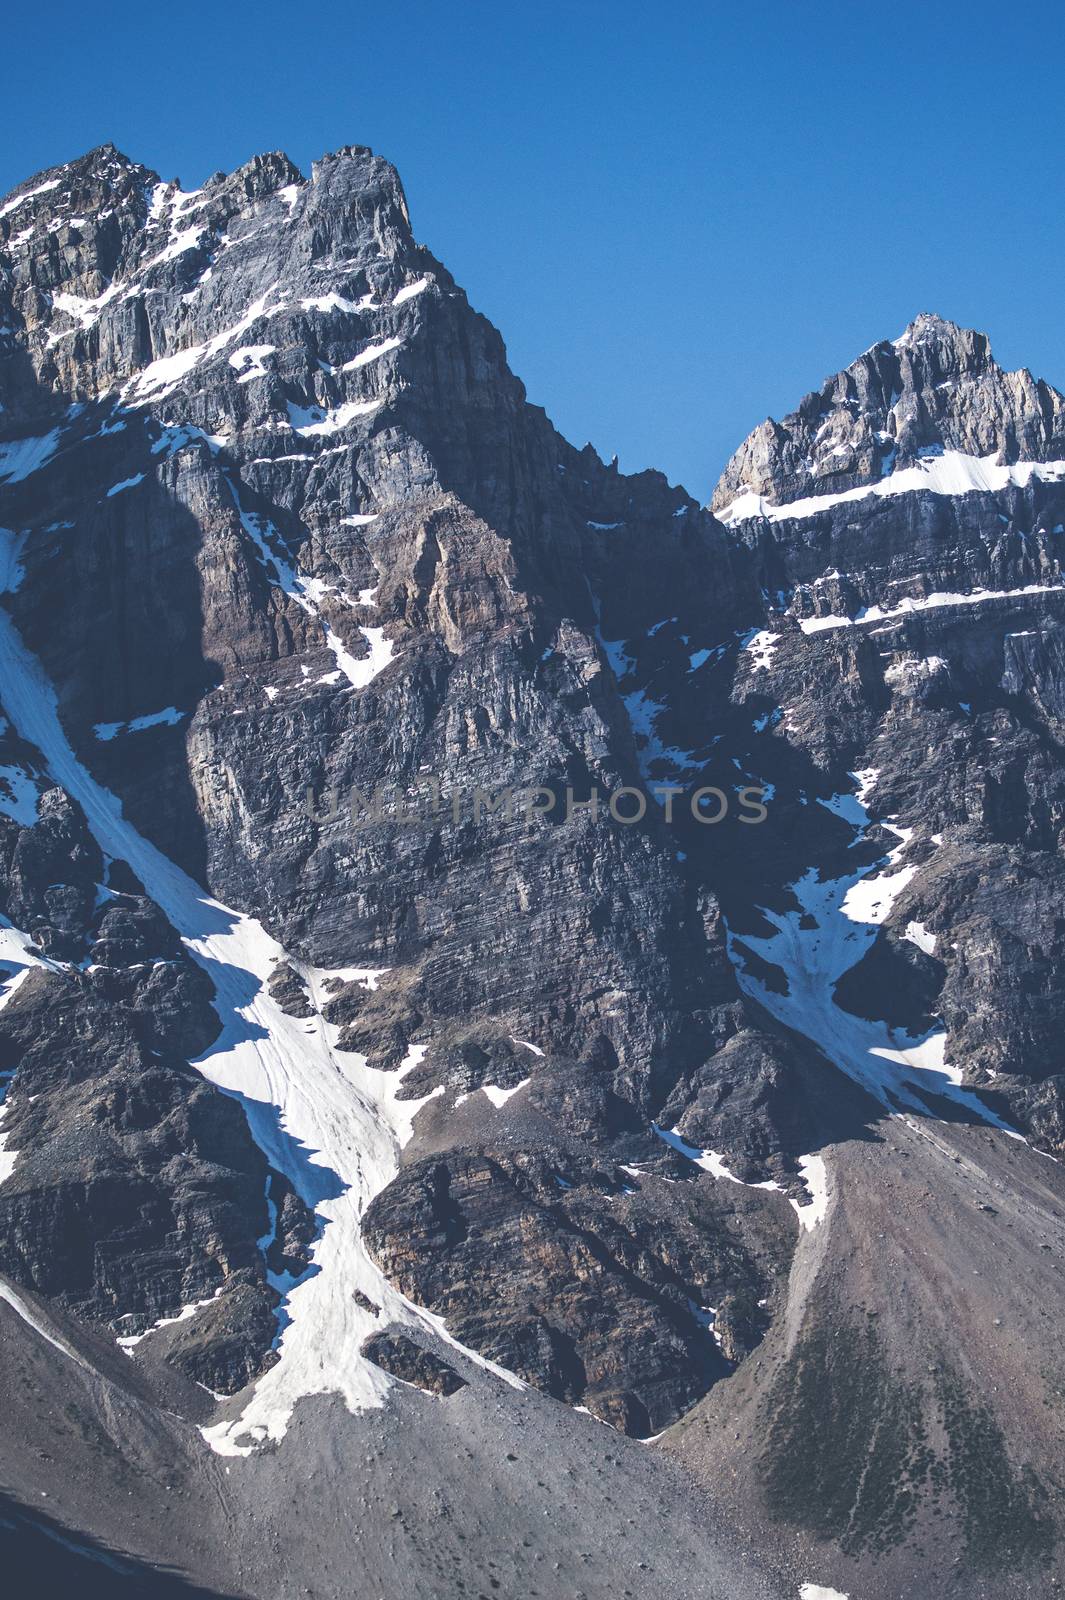 Rough mountain with cliffs and snow by Sportactive